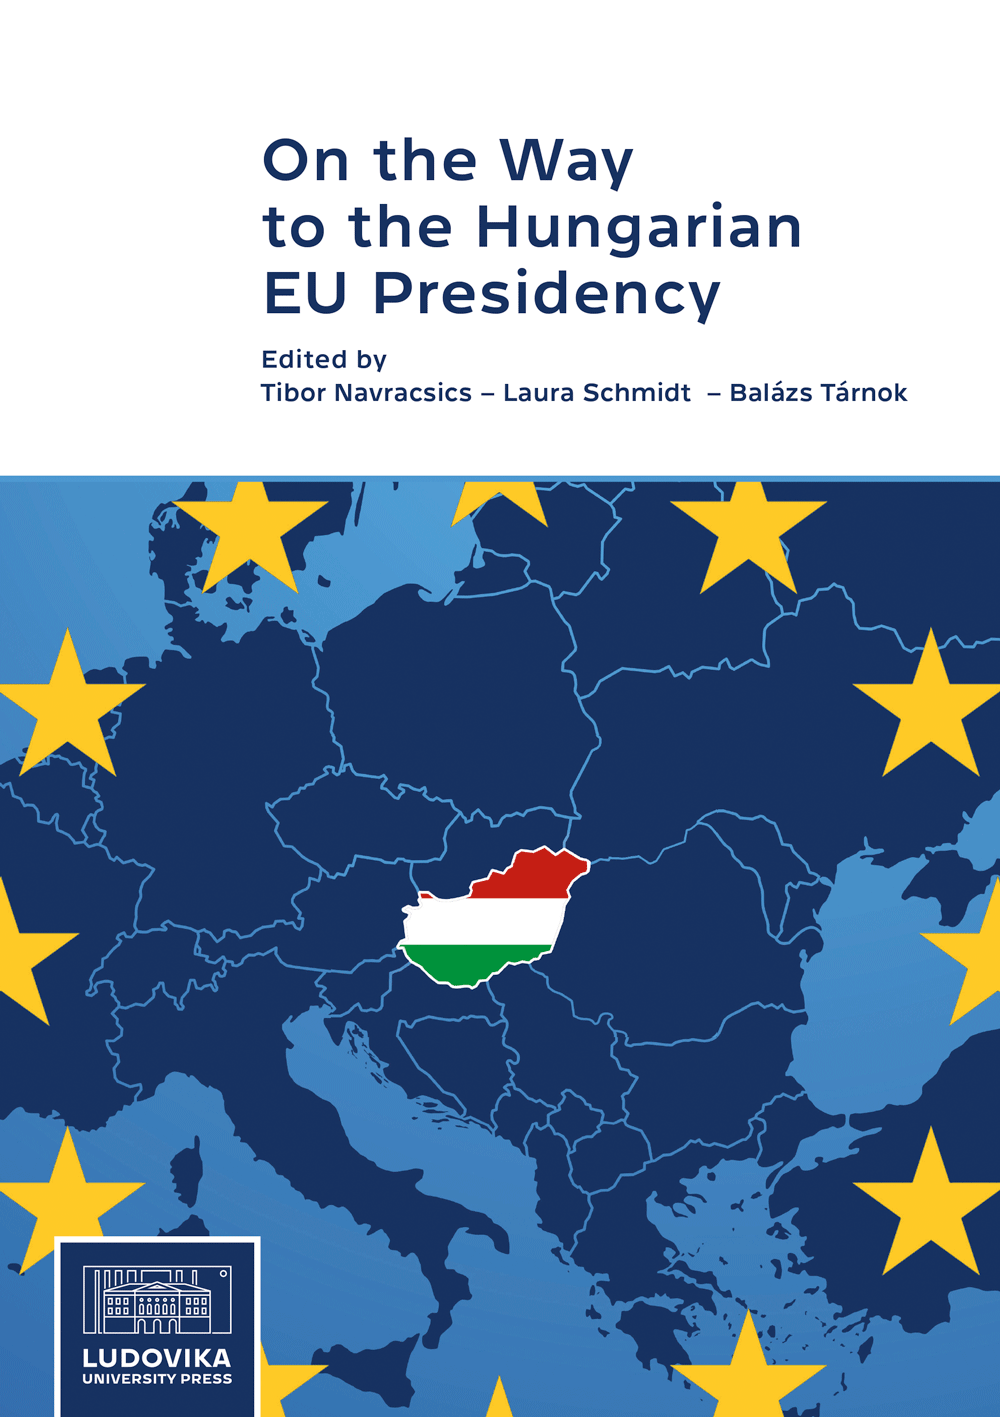 On the Way to the Hungarian EU Presidency